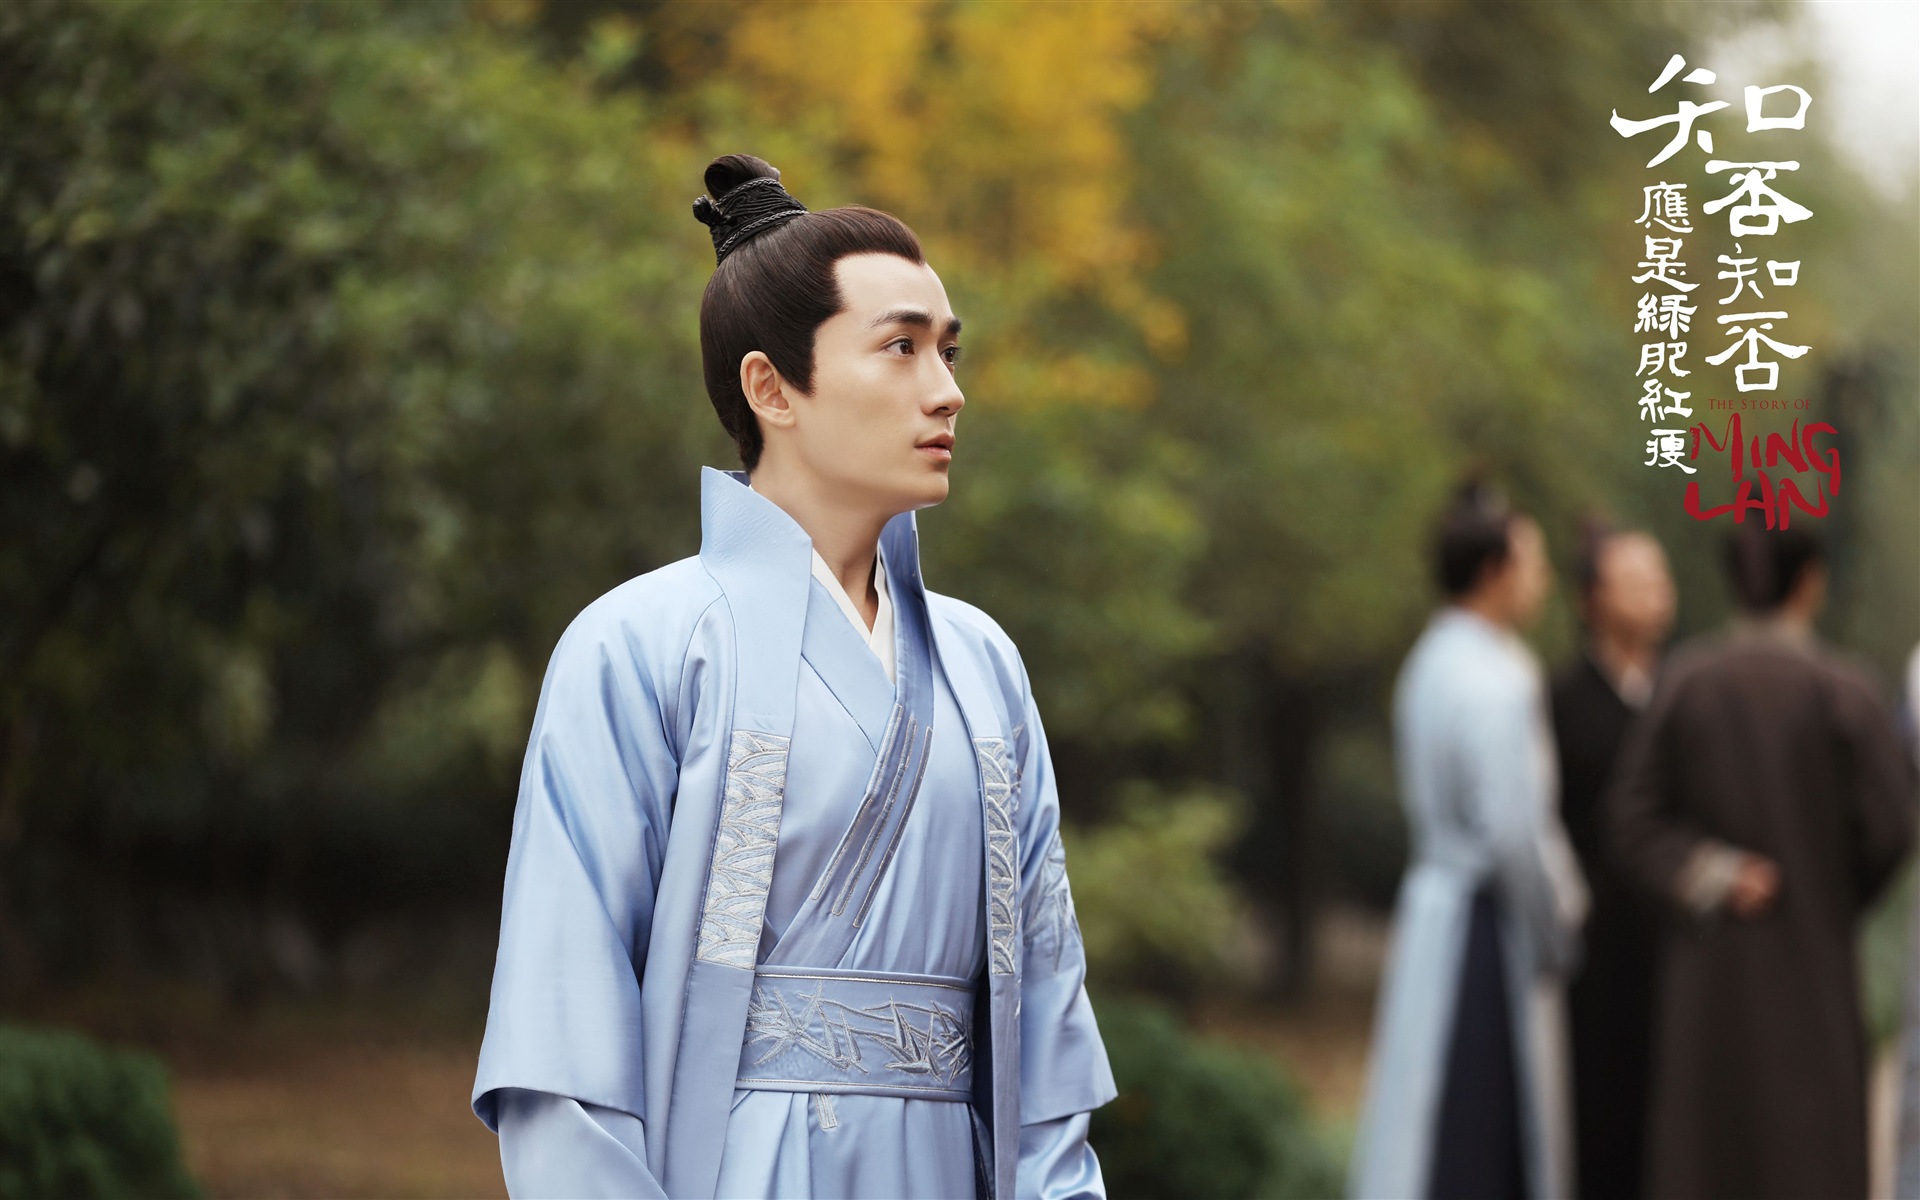 The Story Of MingLan, TV series HD wallpapers #55 - 1920x1200